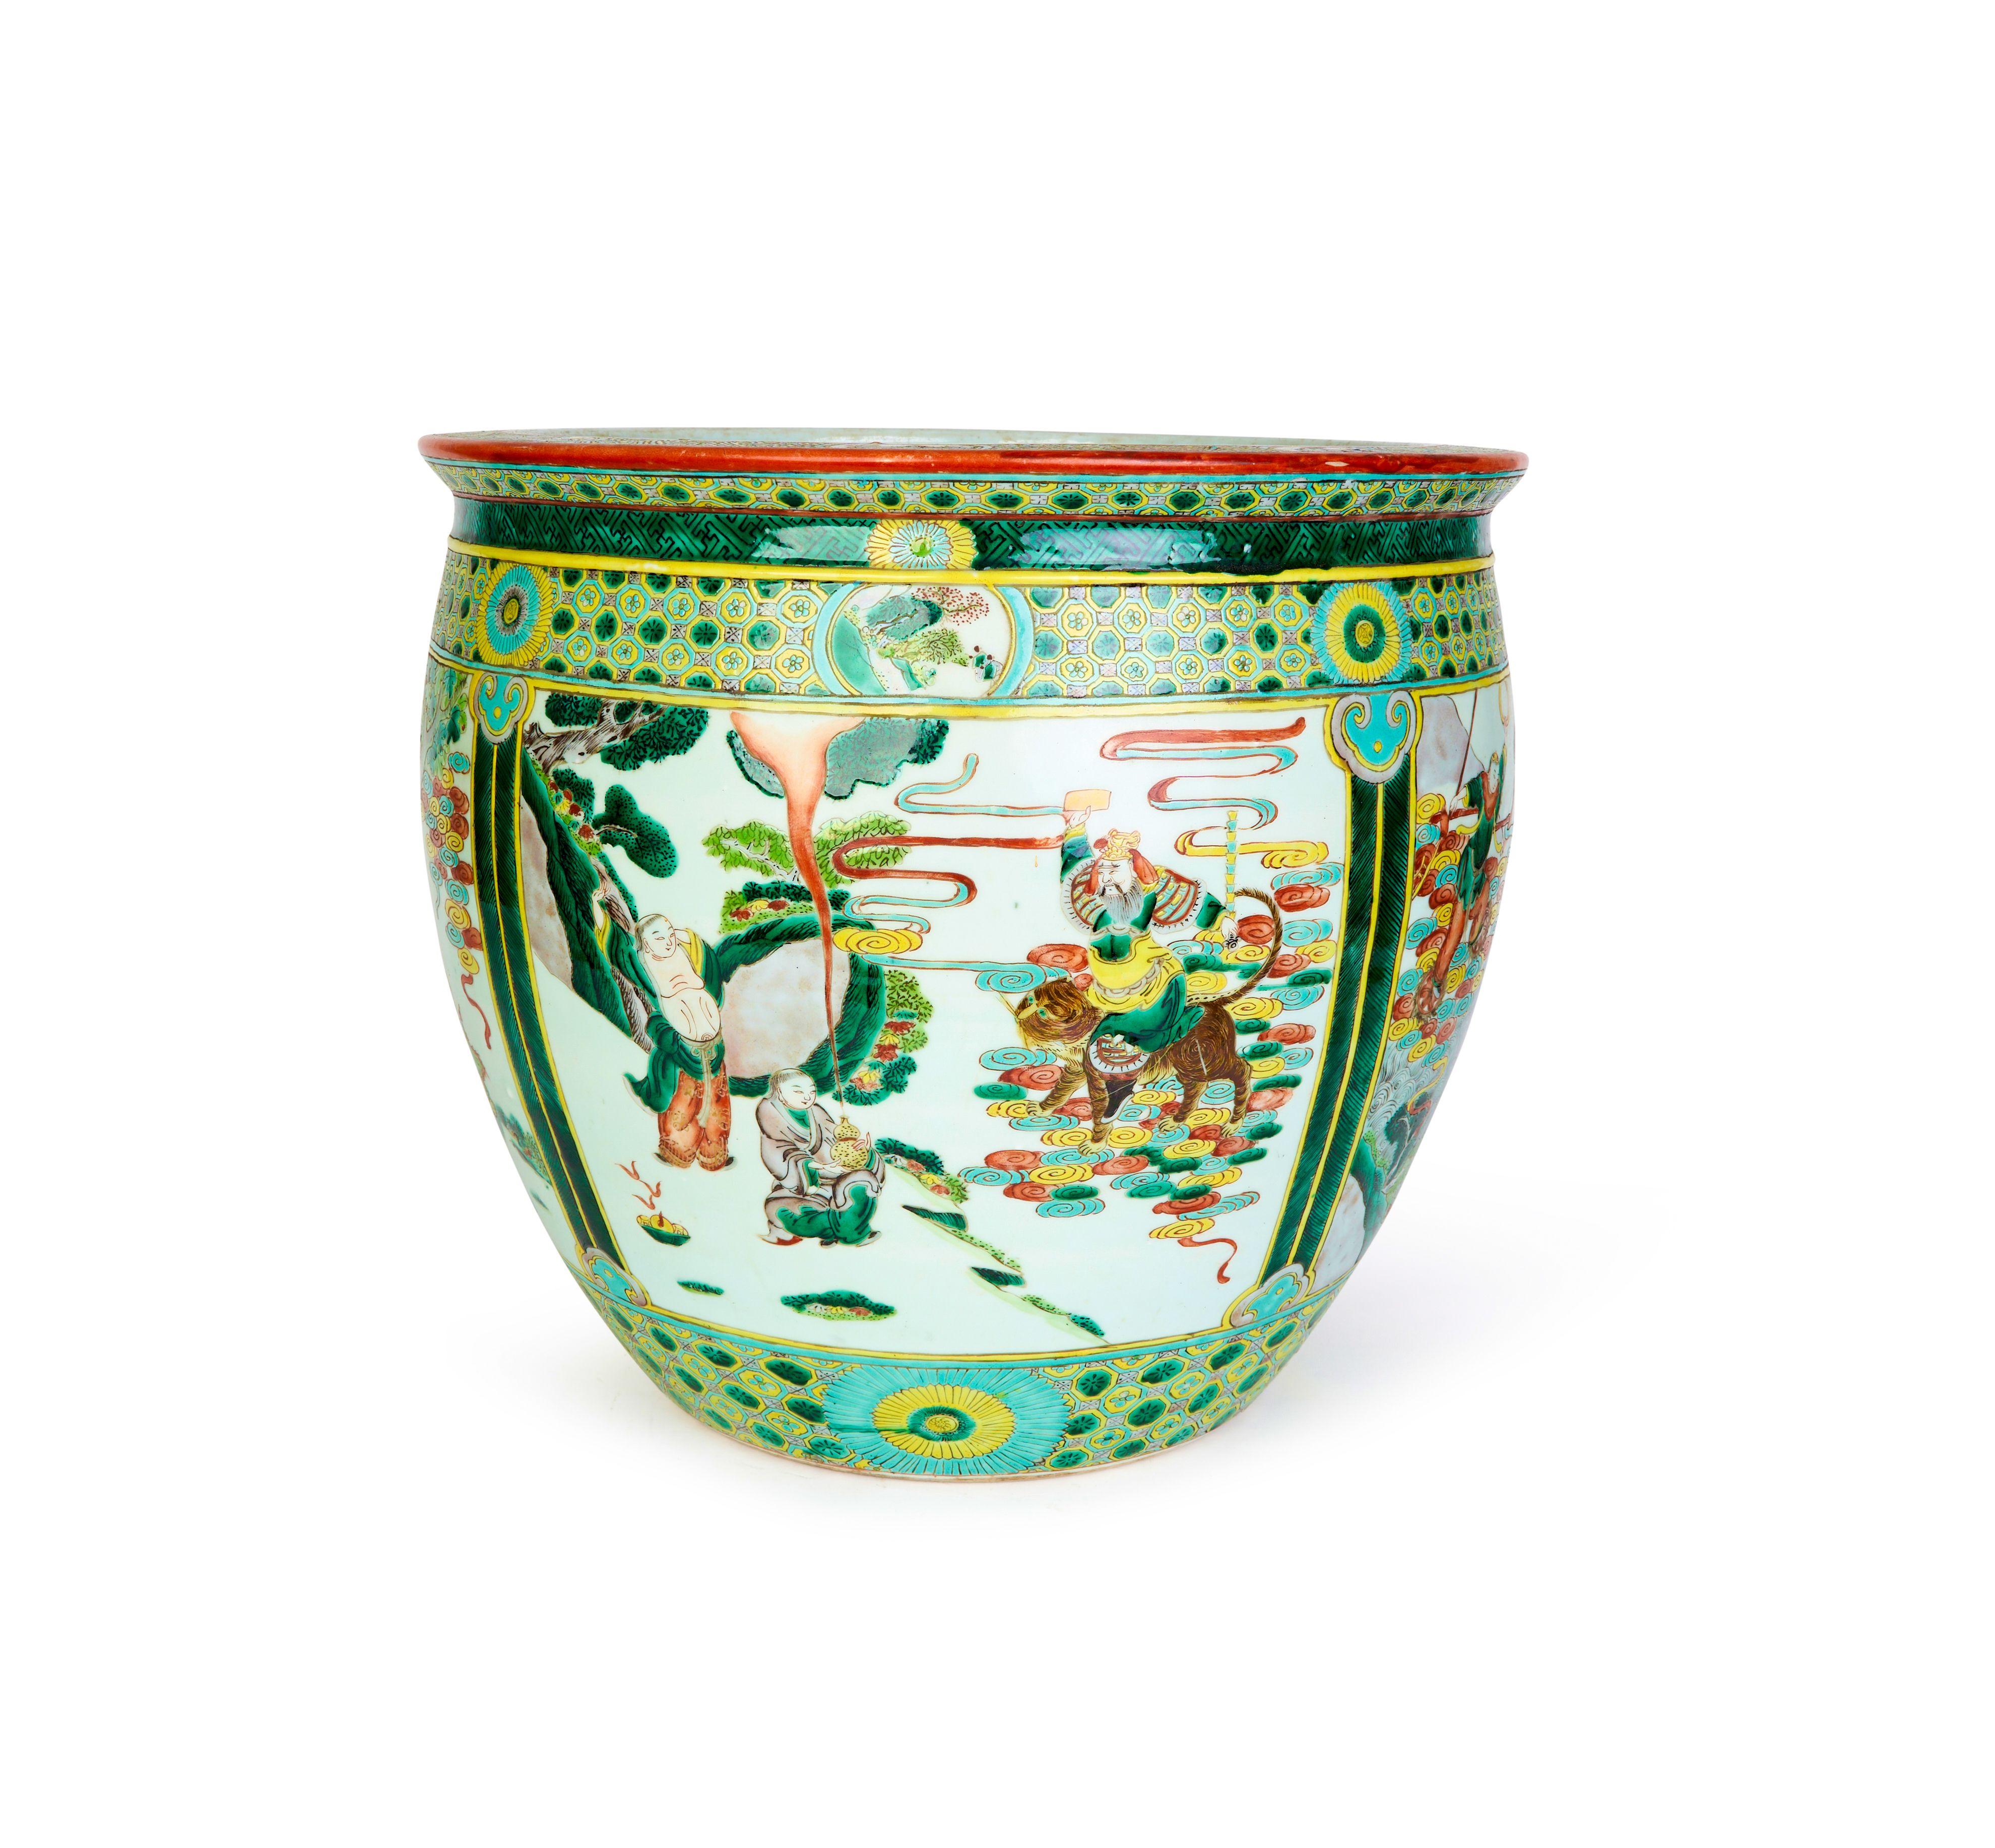 A CHINESE FAMILLE VERTE FIGURAL PLANTER, QING DYNASTY (1644-1911) - Image 3 of 5